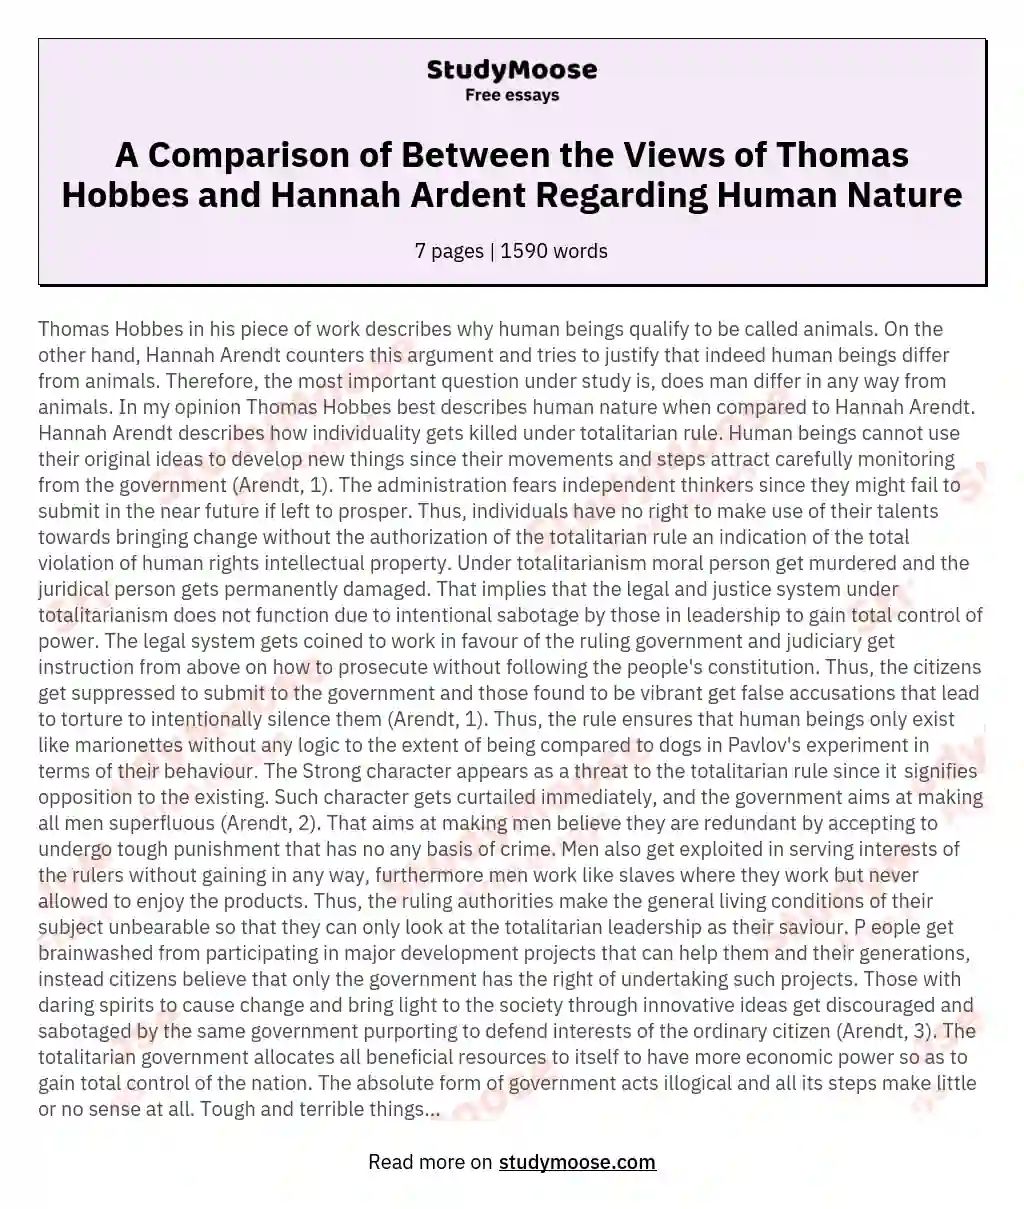 A Comparison of Between the Views of Thomas Hobbes and Hannah Ardent Regarding Human Nature essay